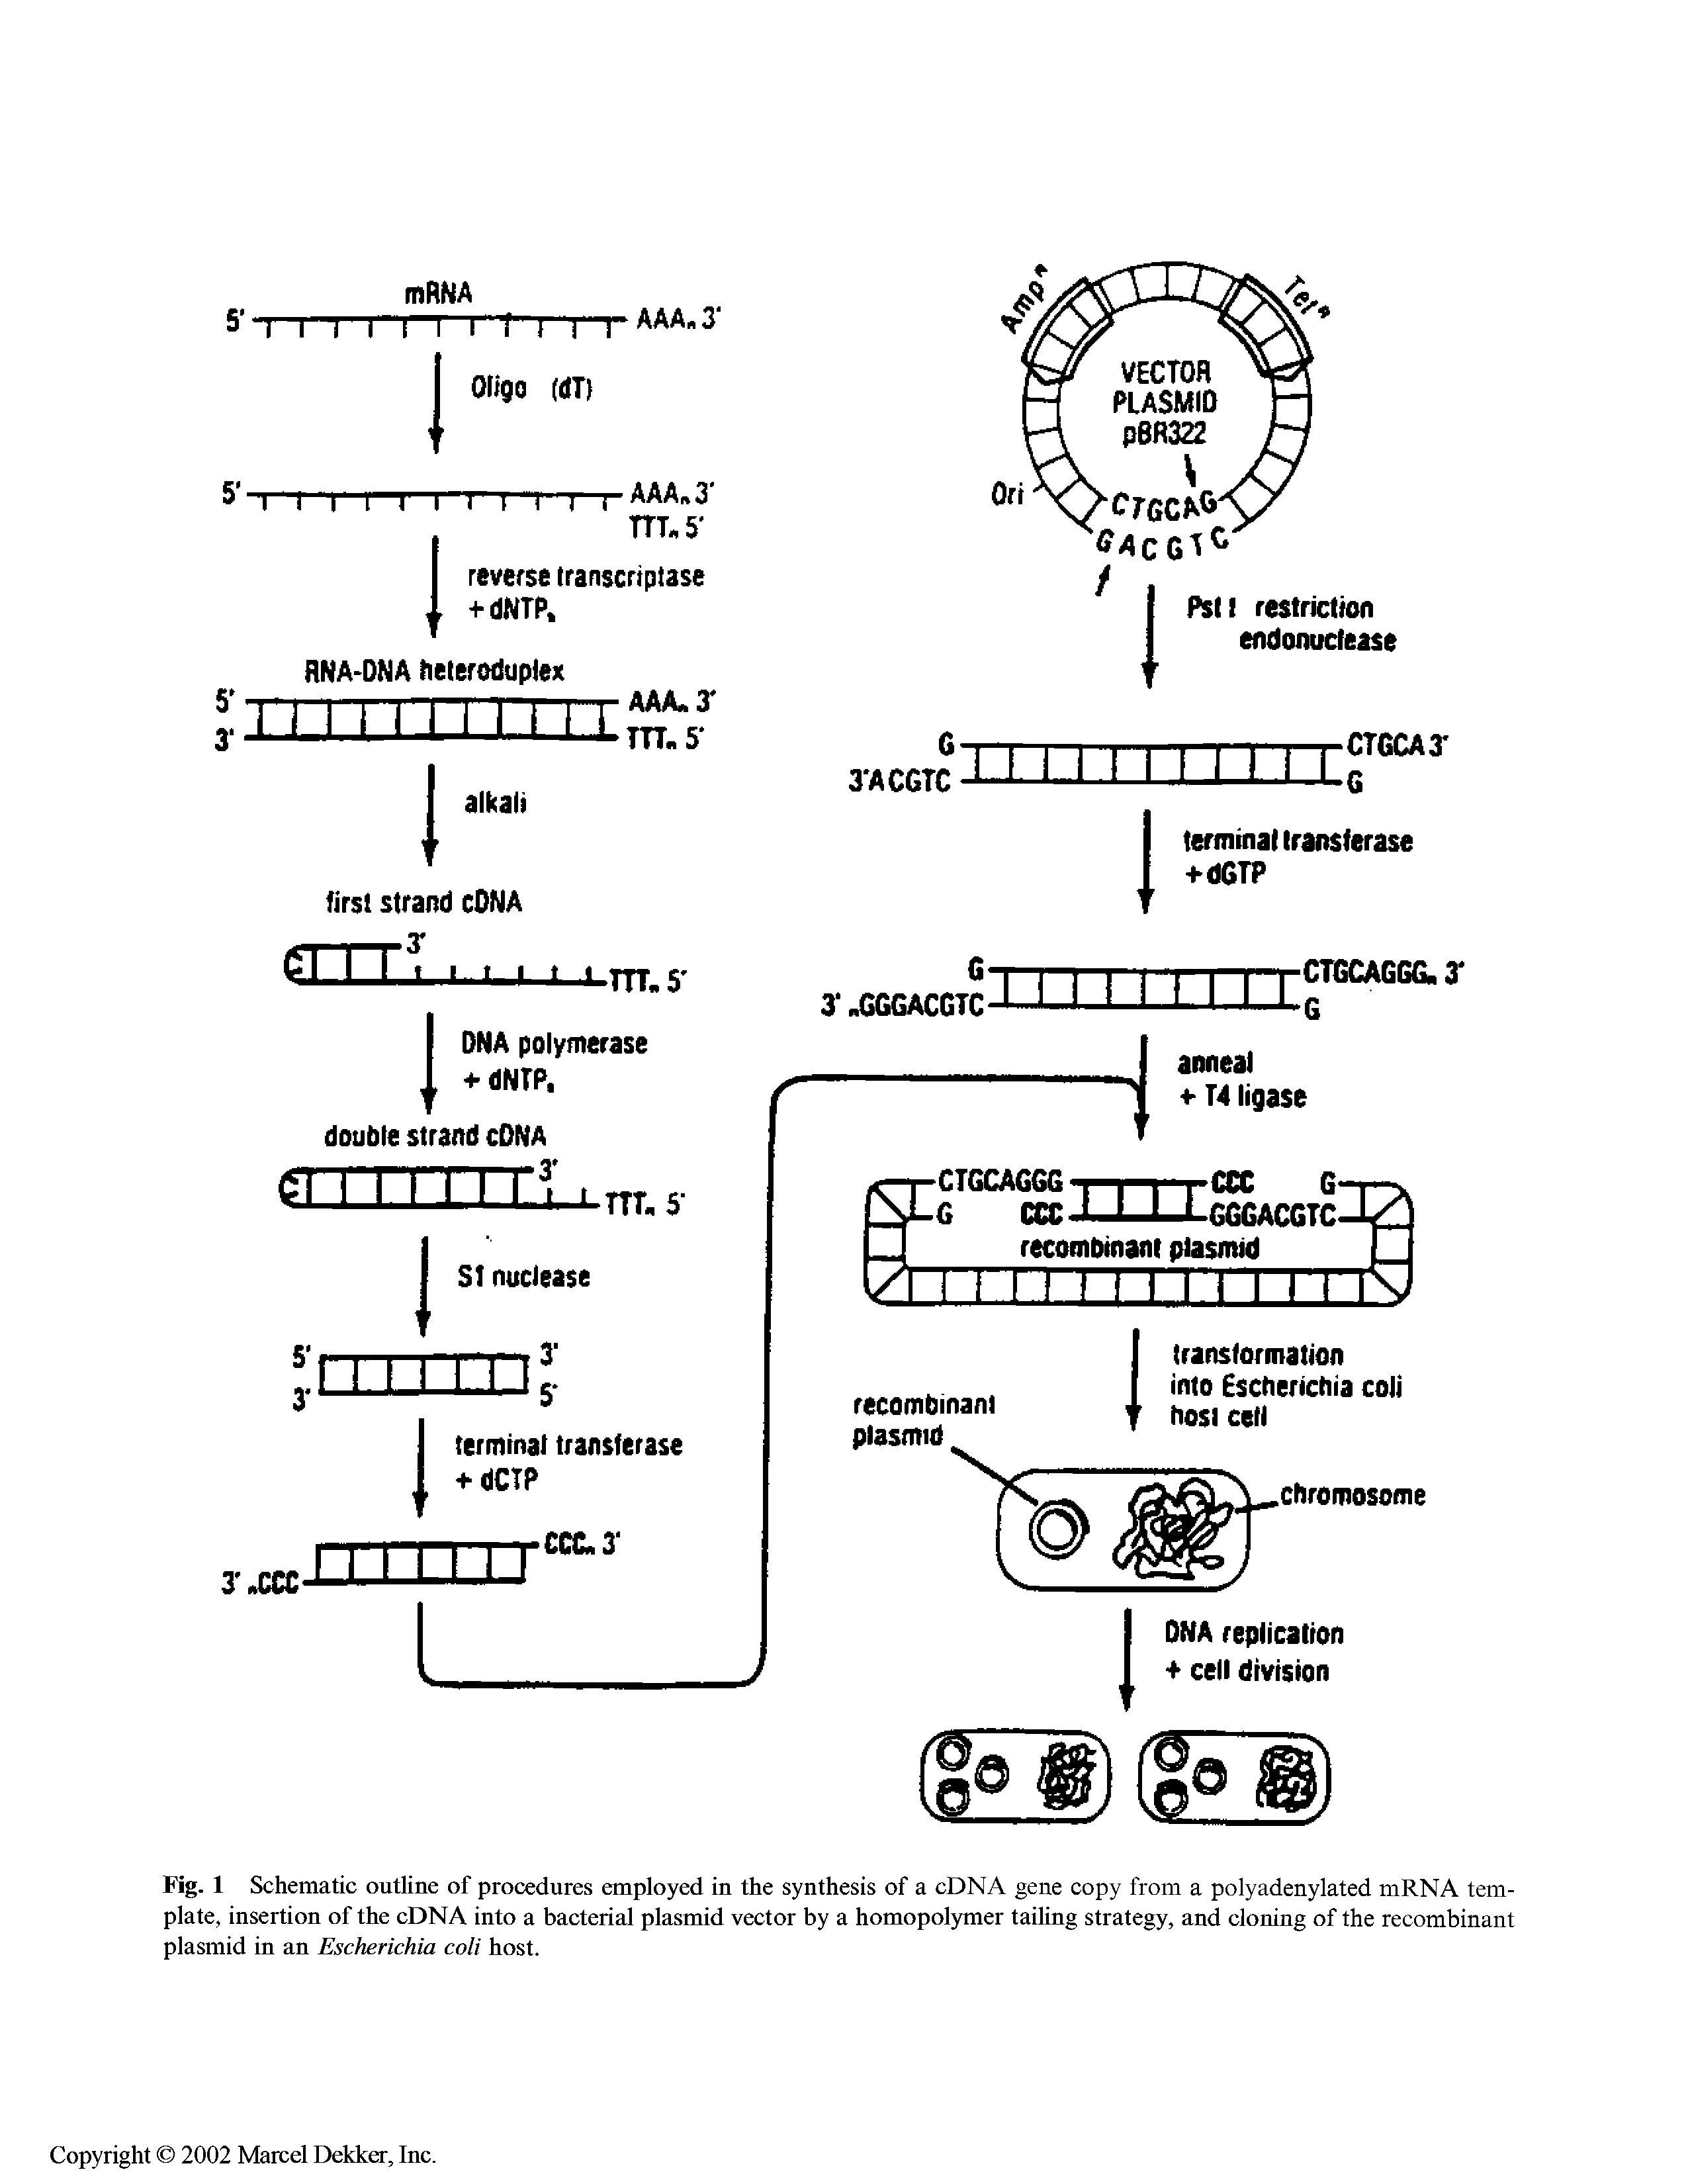 Fig. 1 Schematic outline of procedures employed in the synthesis of a cDNA gene copy from a polyadenylated mRNA template, insertion of the cDNA into a bacterial plasmid vector by a homopolymer tailing strategy, and cloning of the recombinant plasmid in an Escherichia coli host.